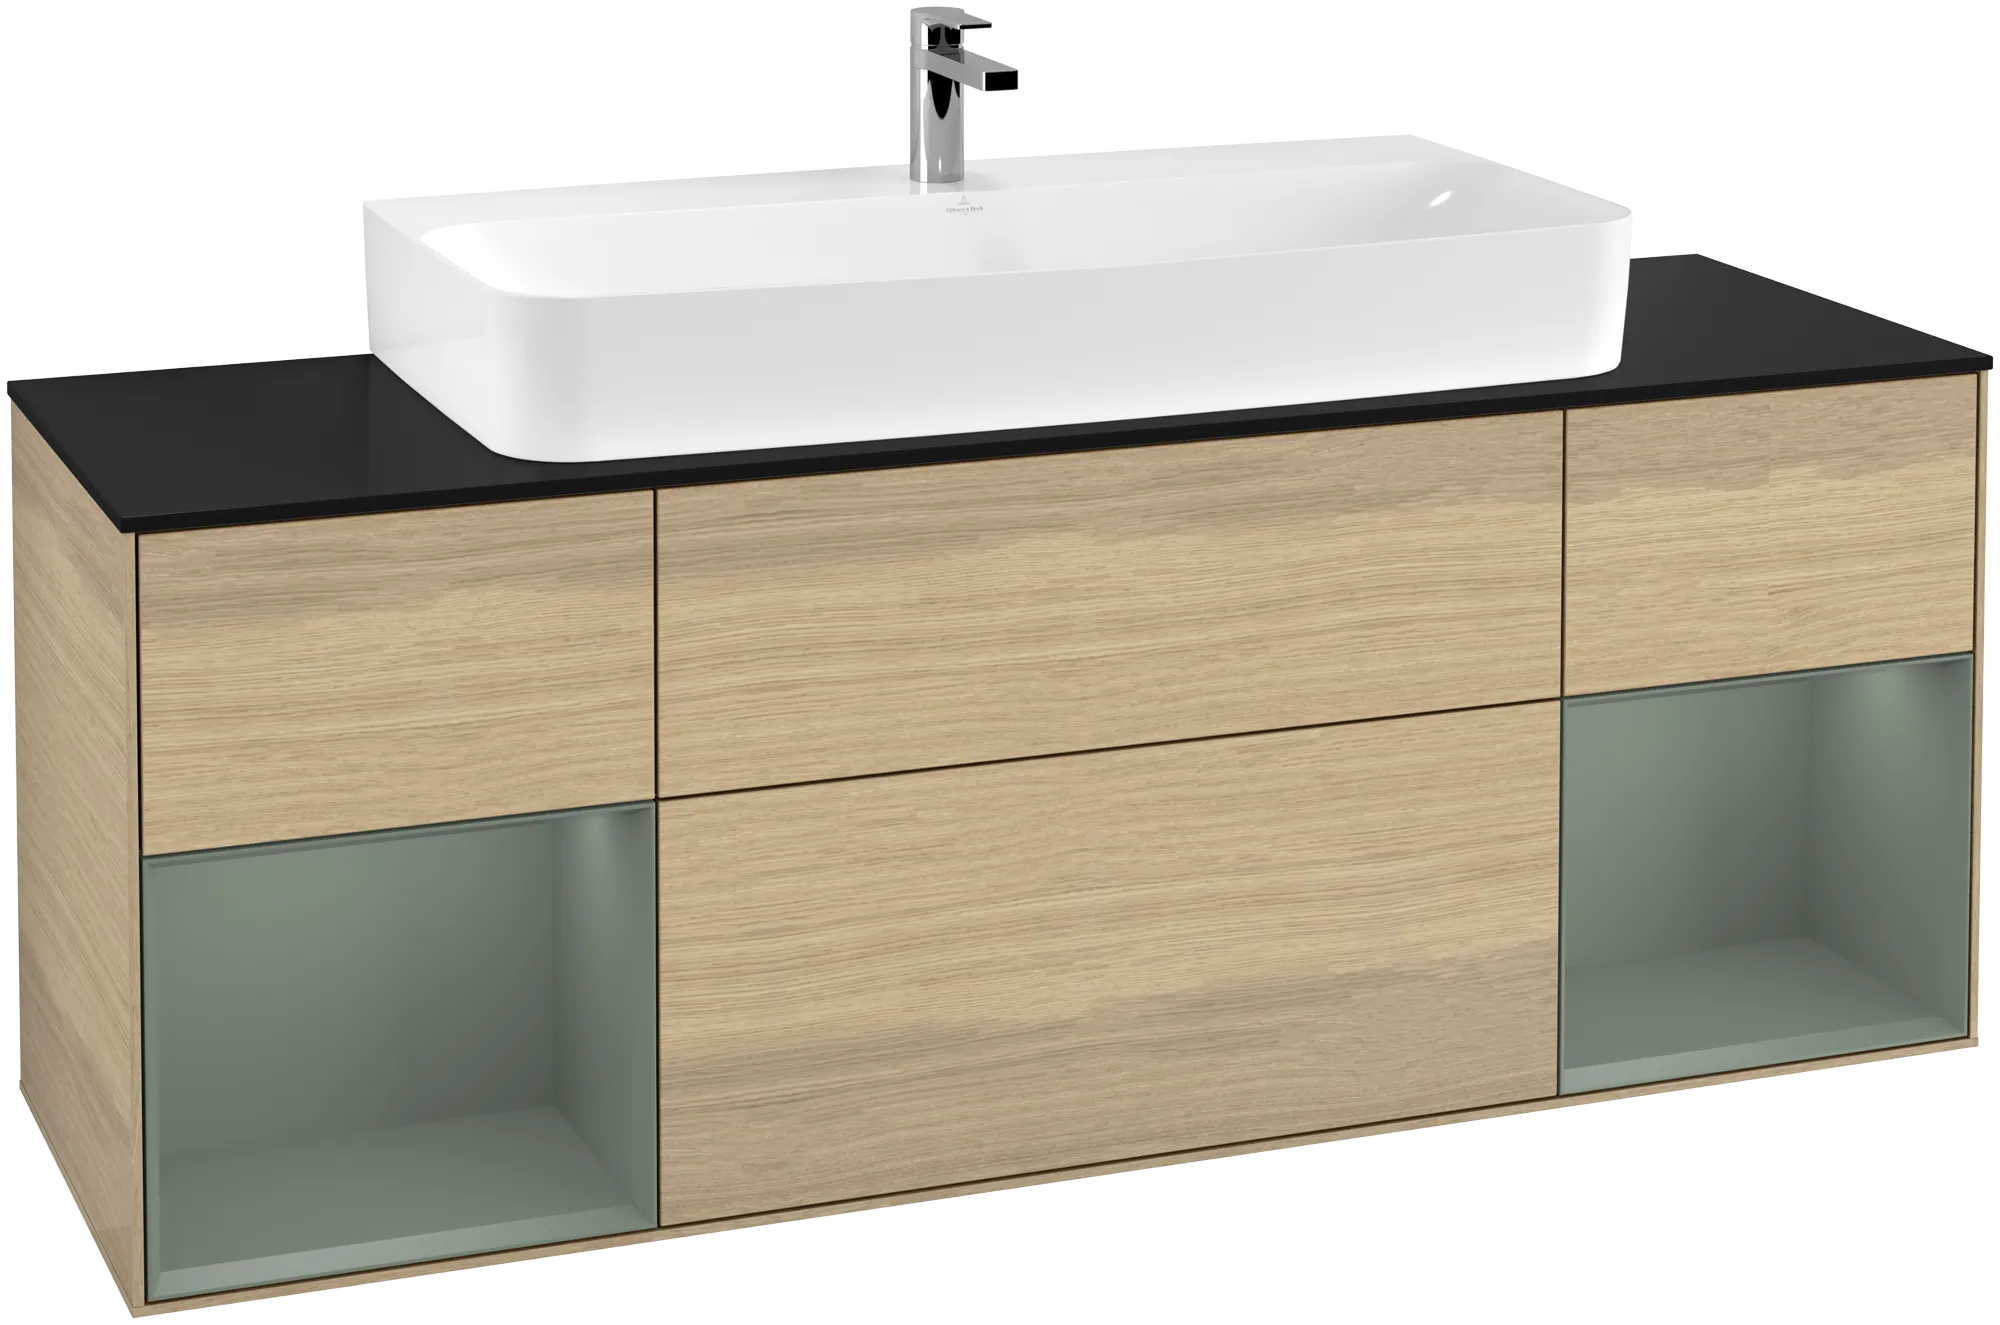 Picture of VILLEROY BOCH Finion Vanity unit, with lighting, 4 pull-out compartments, 1600 x 603 x 501 mm, Oak Veneer / Olive Matt Lacquer / Glass Black Matt #G212GMPC